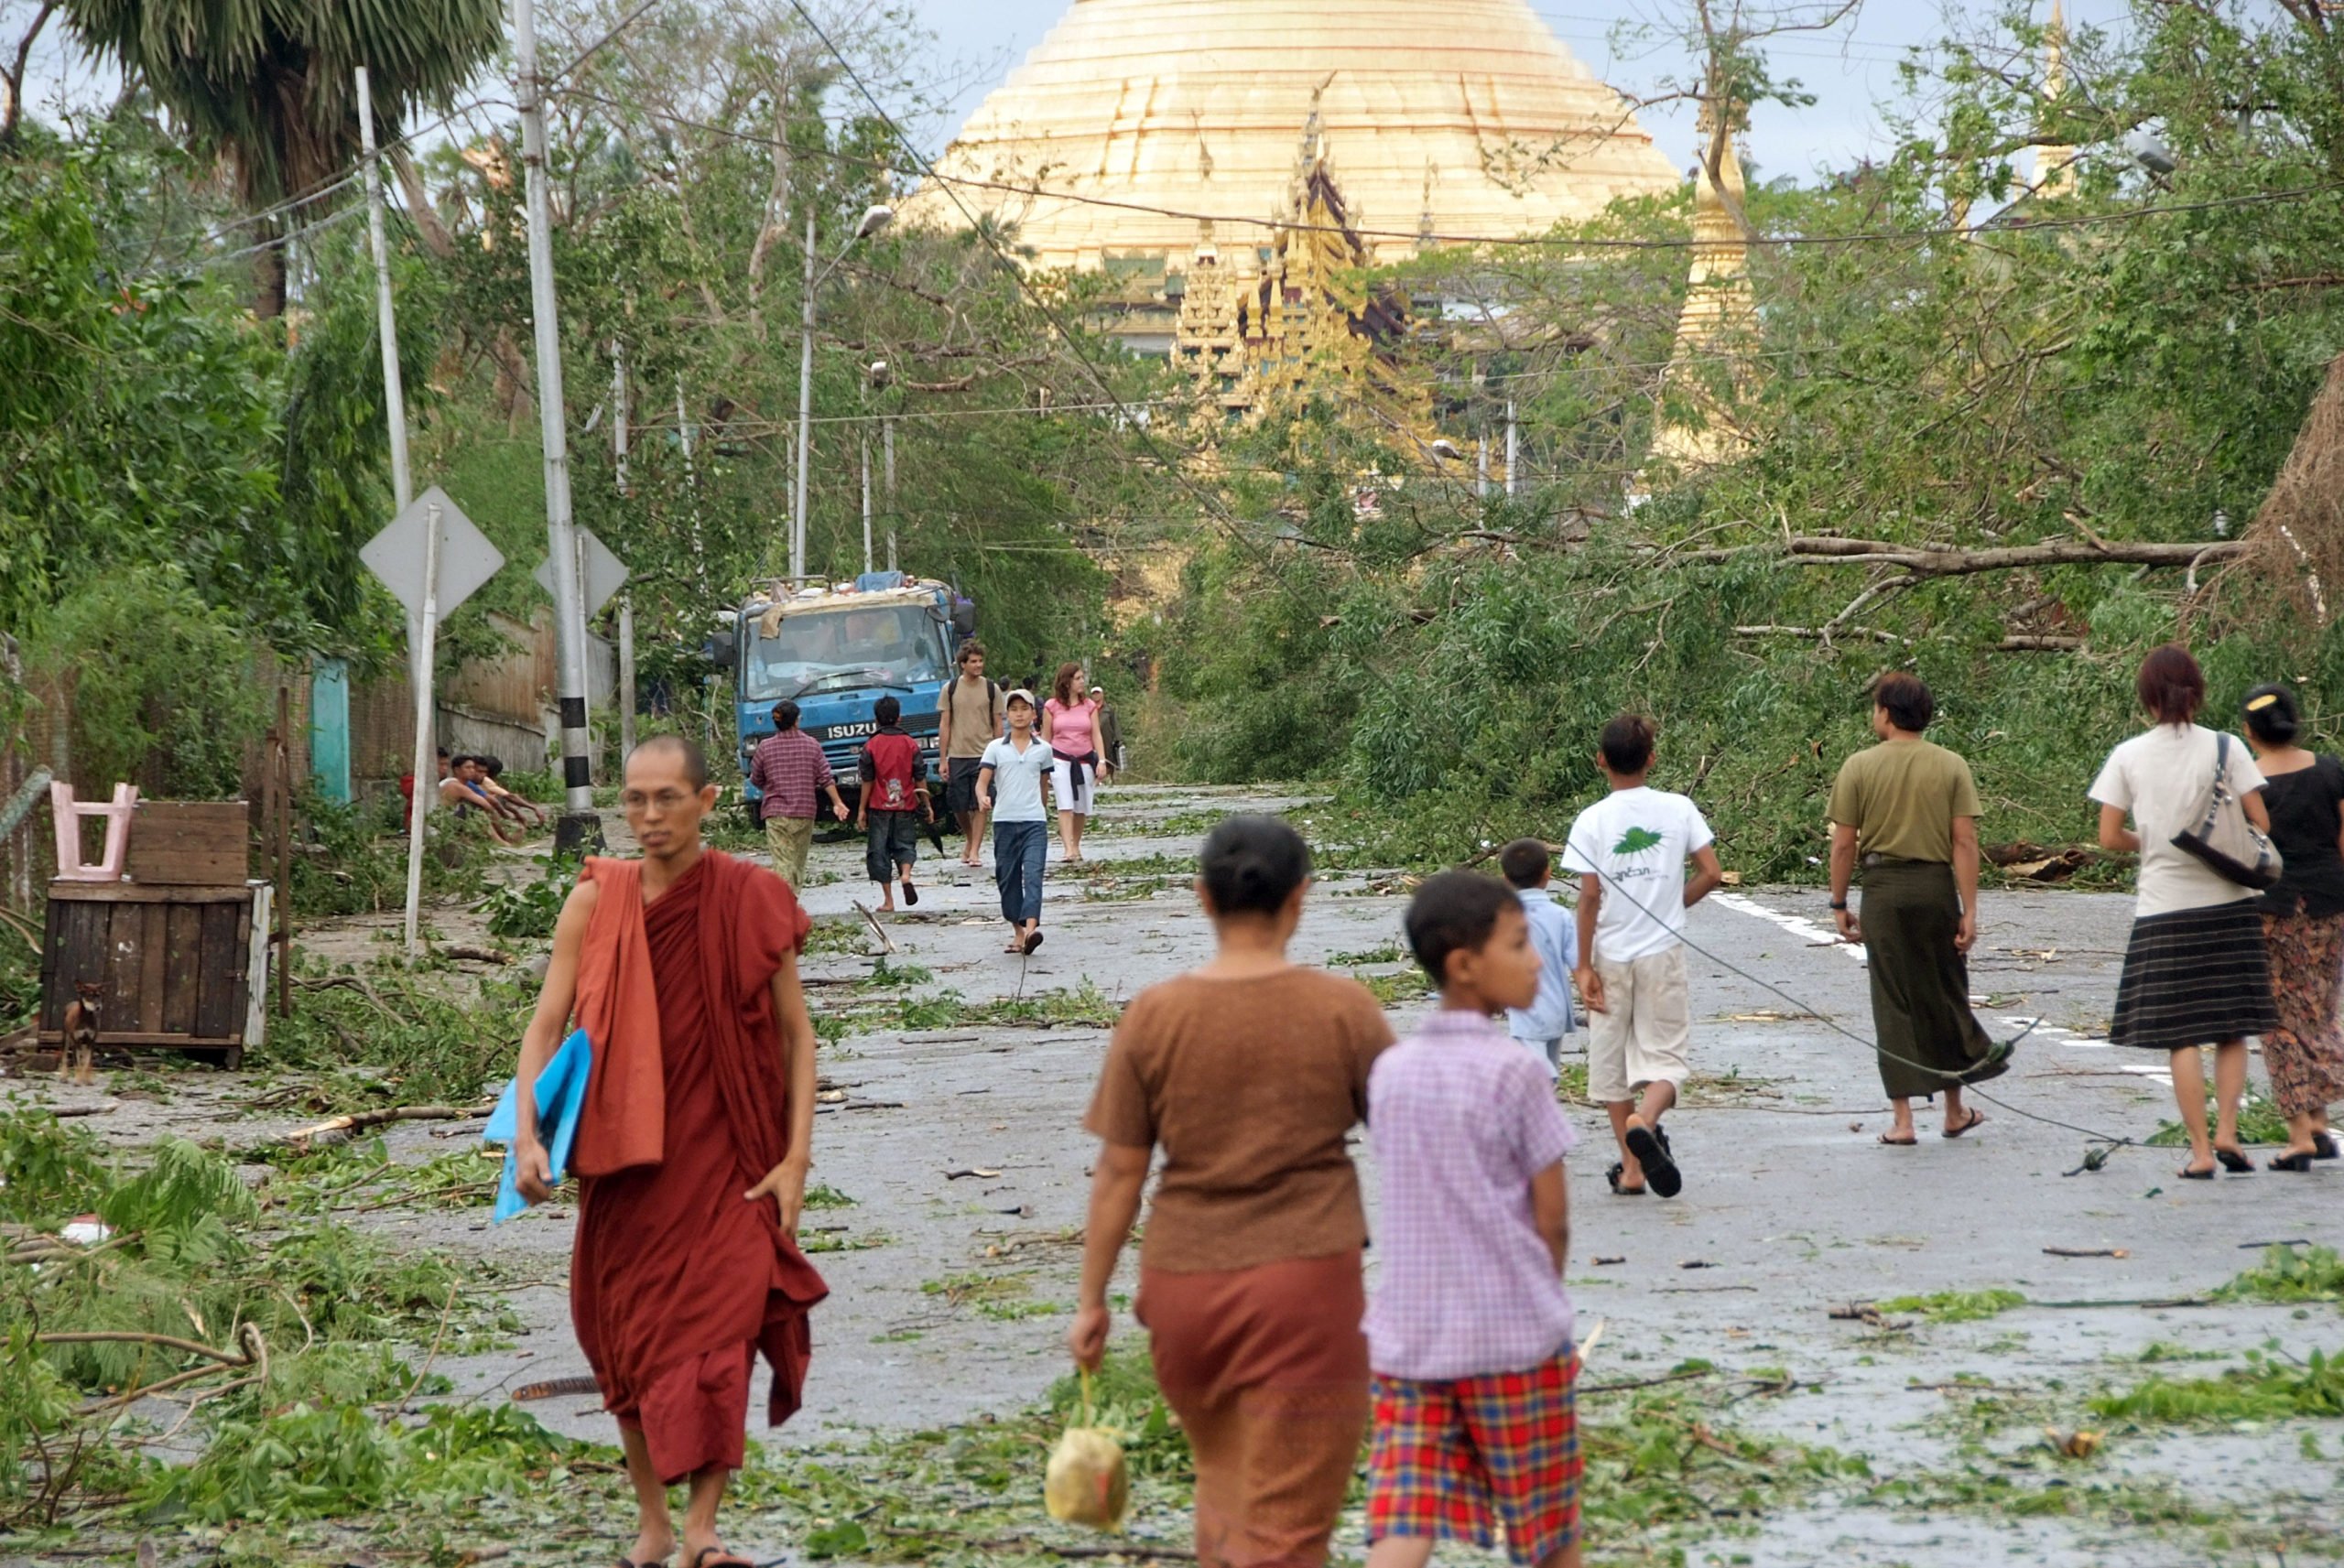 people walking on a street coated with fallen trees and other debris